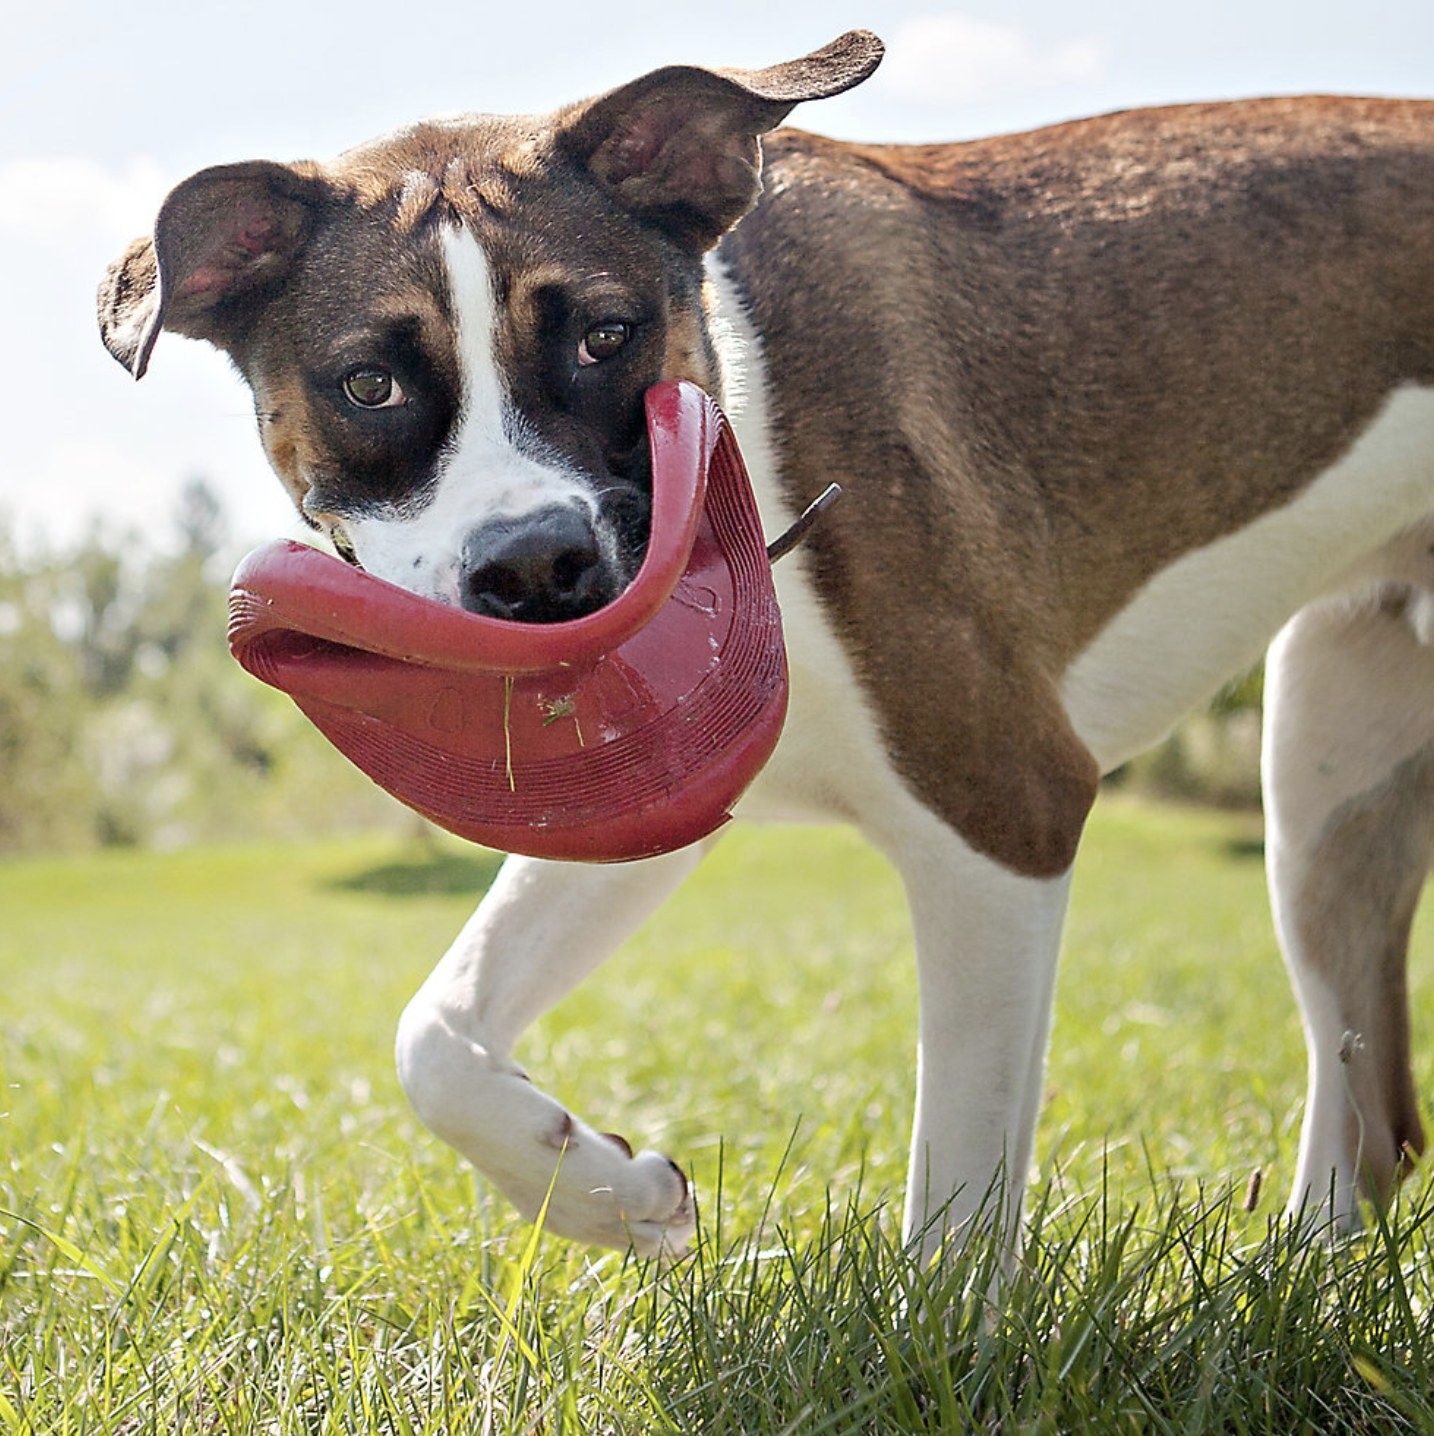 A dog with a red frisbee in its mouth